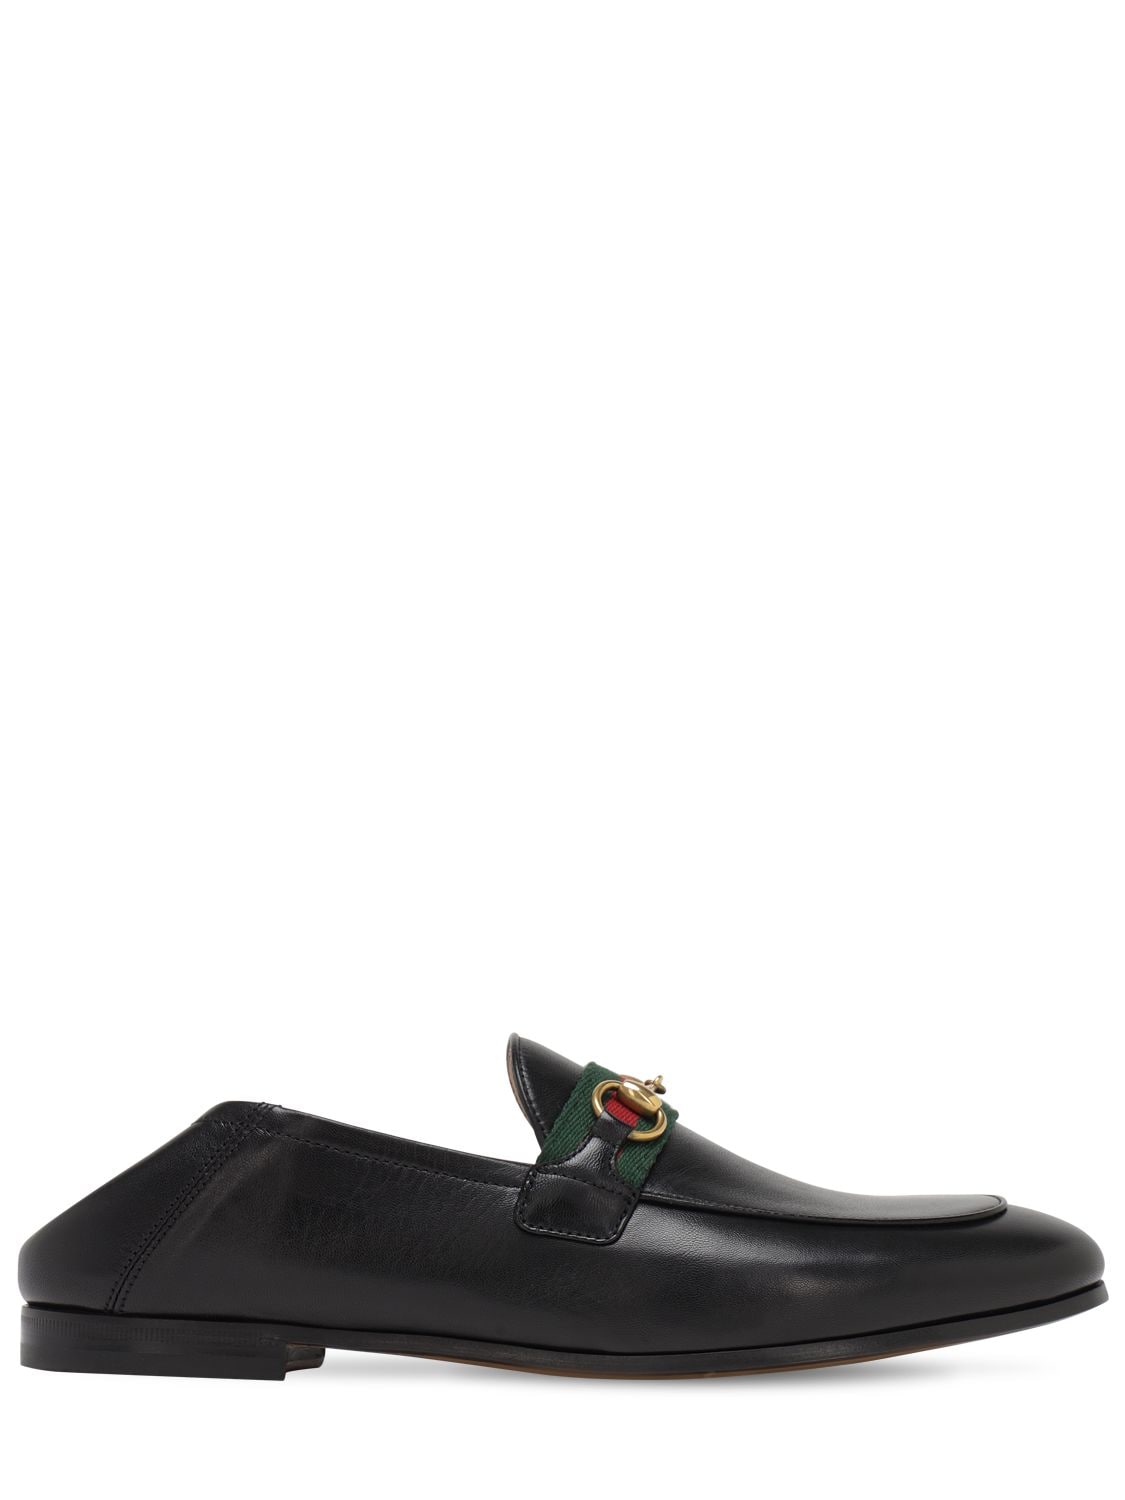 GUCCI 10mm Brixton Leather Loafers